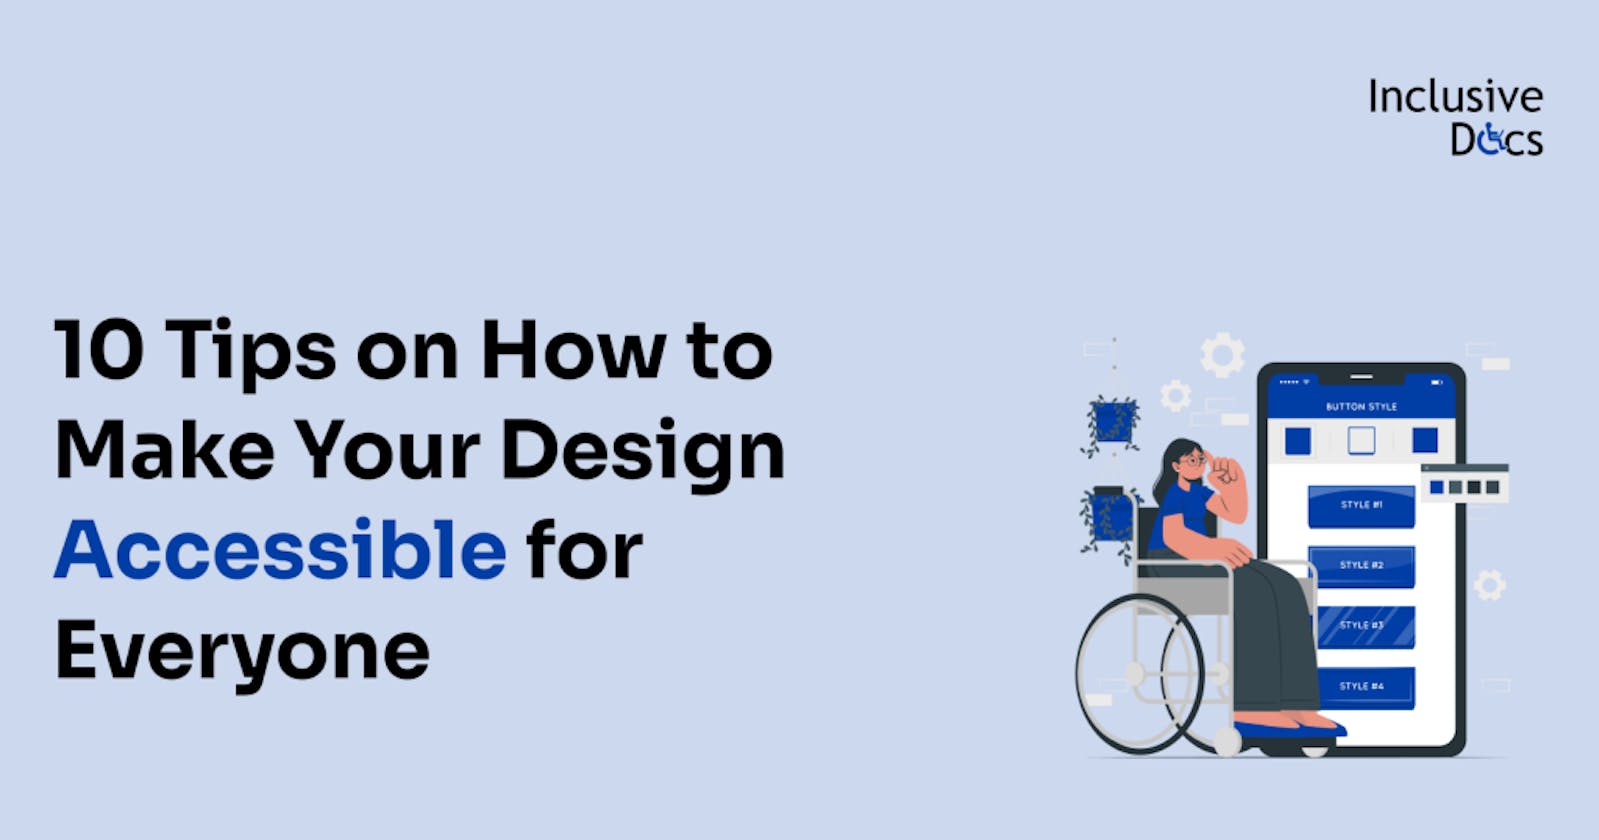 10 Tips on How to Make Your Design Accessible for Everyone